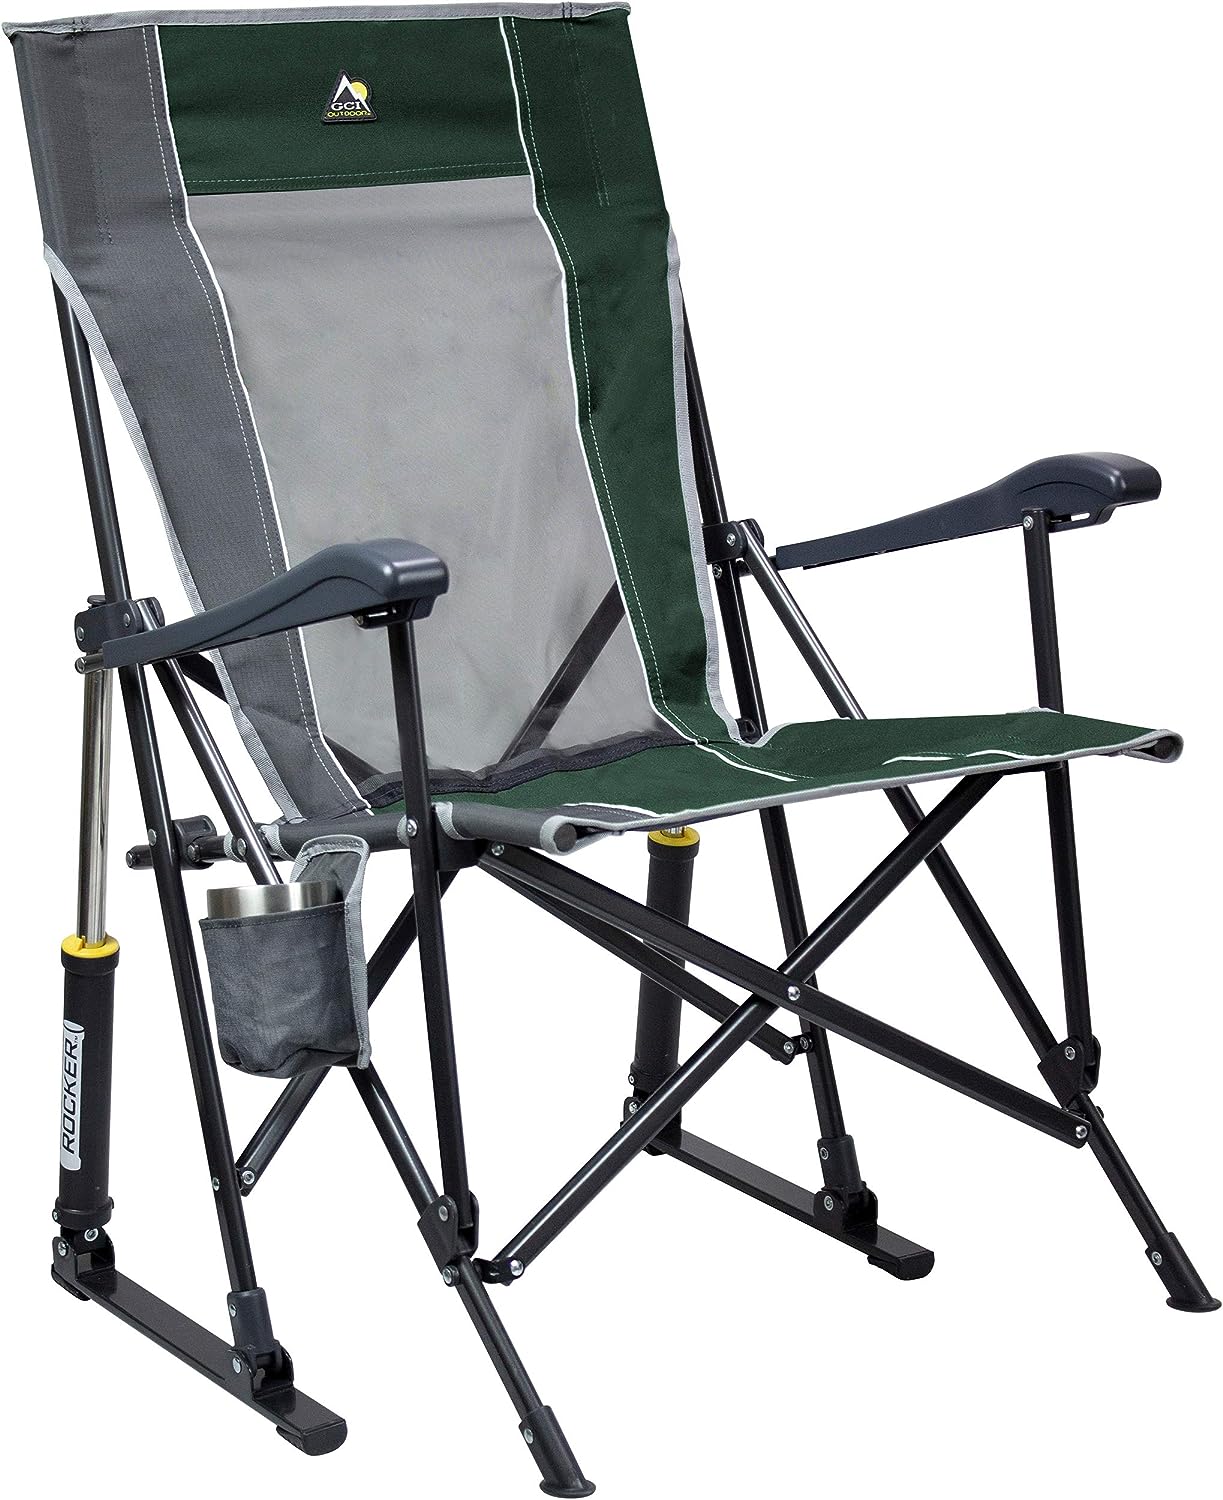 camping chair with a bottle pockets - pack in ne day